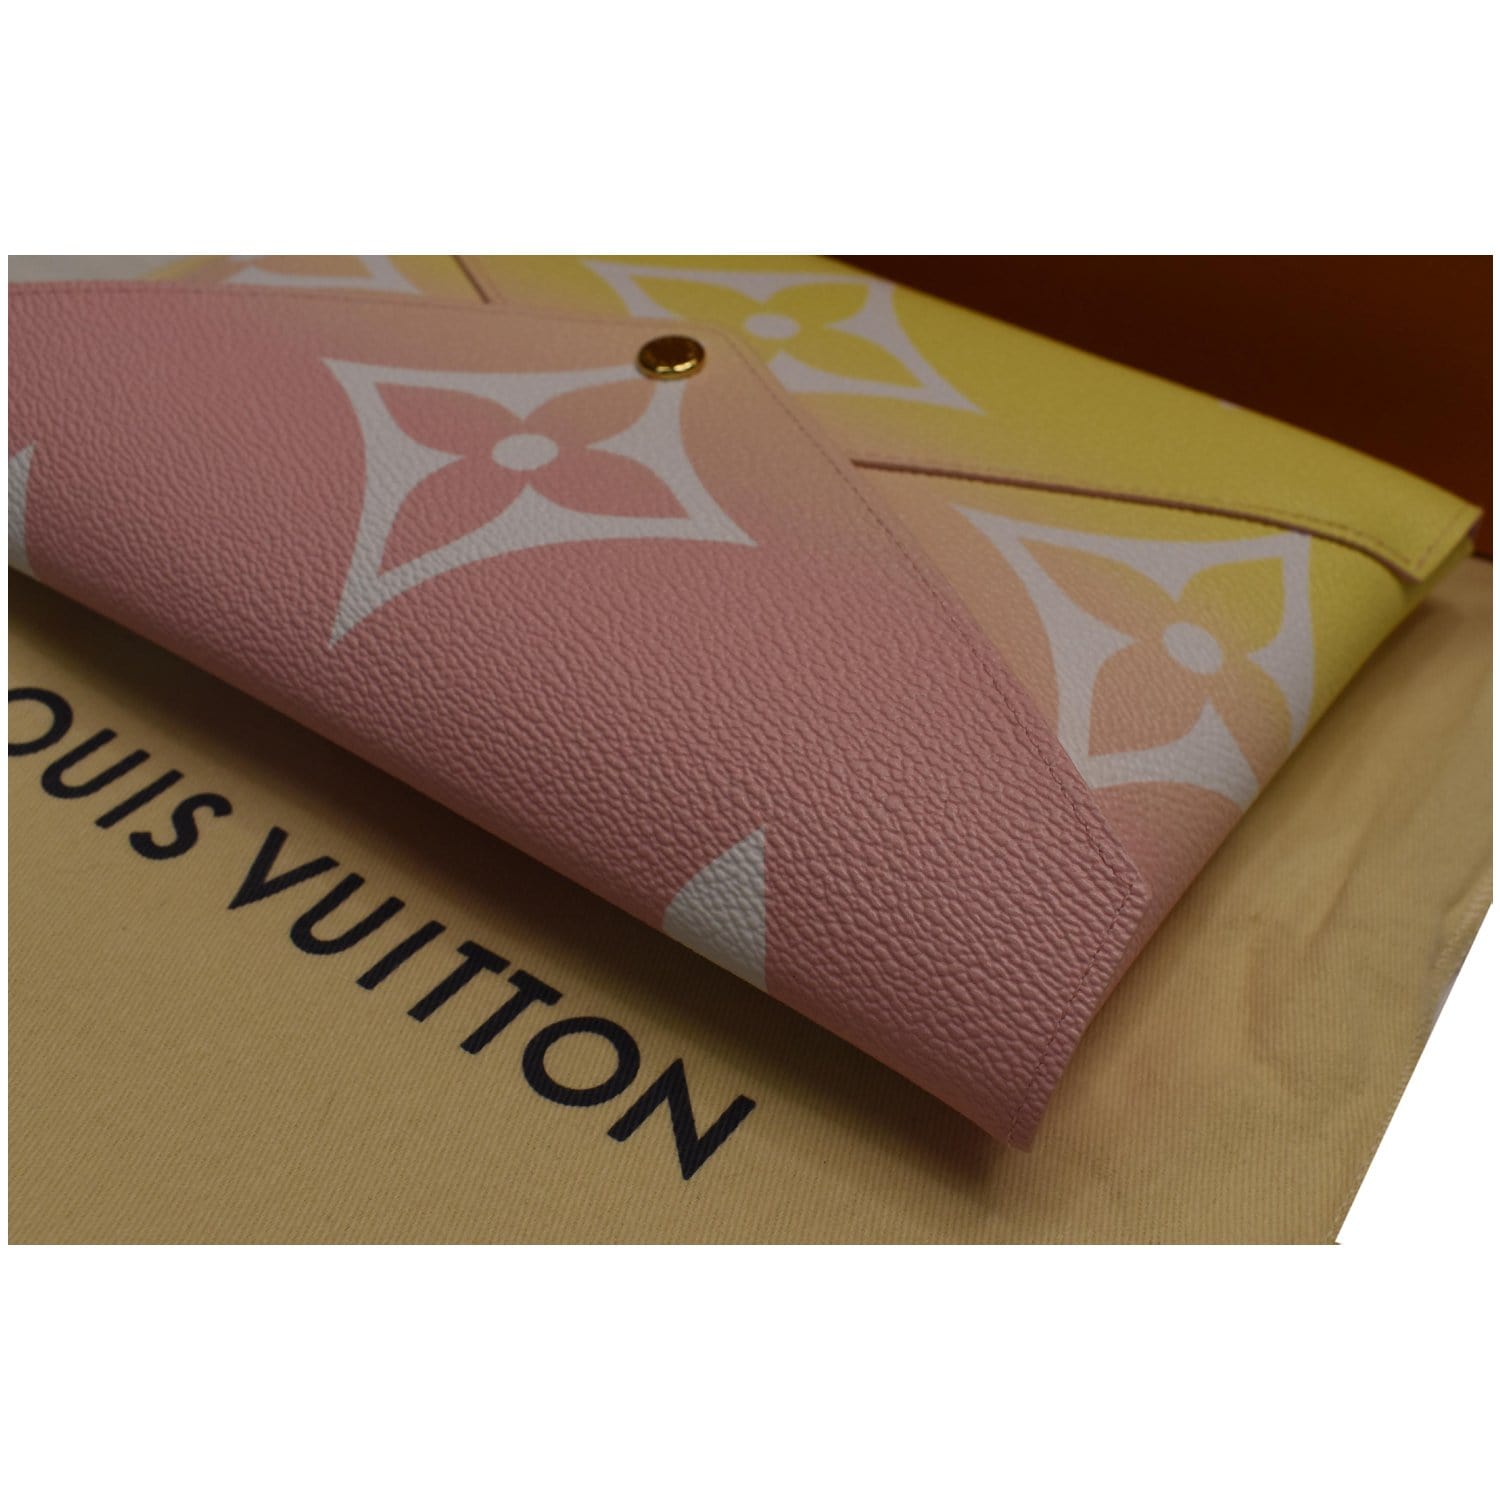 Louis Vuitton Giant Monogram Canvas By The Pool Kirigami Pouch Set